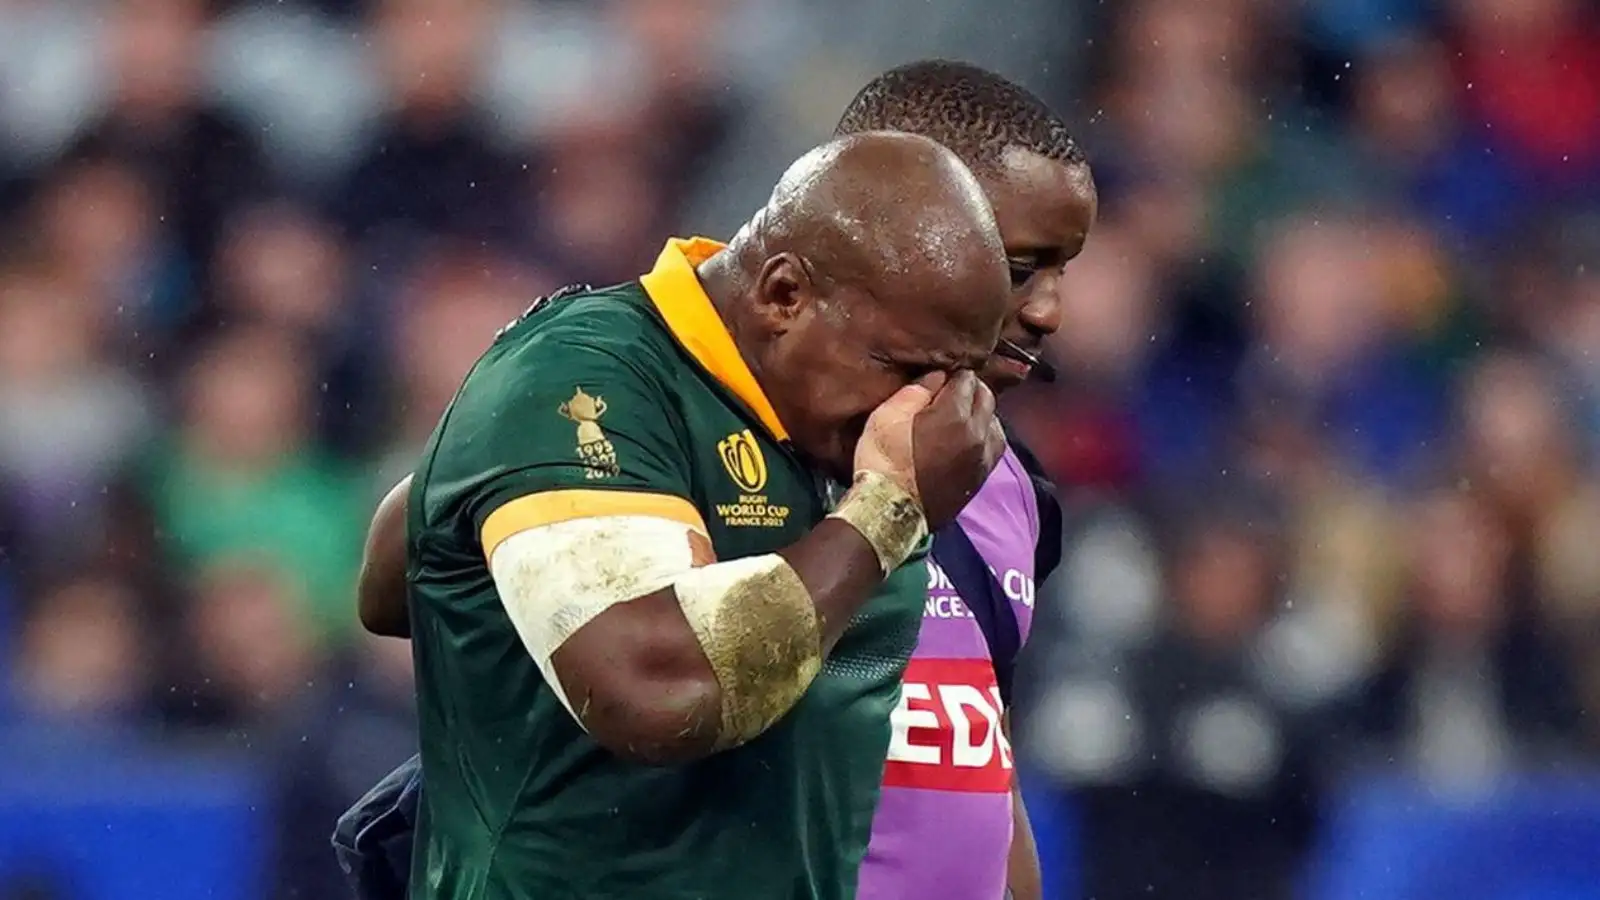 Springboks hooker Mbongeni 'Bongi' Mbonambi walks off injured during the Rugby World Cup 2023 final match at the Stade de France in Paris.